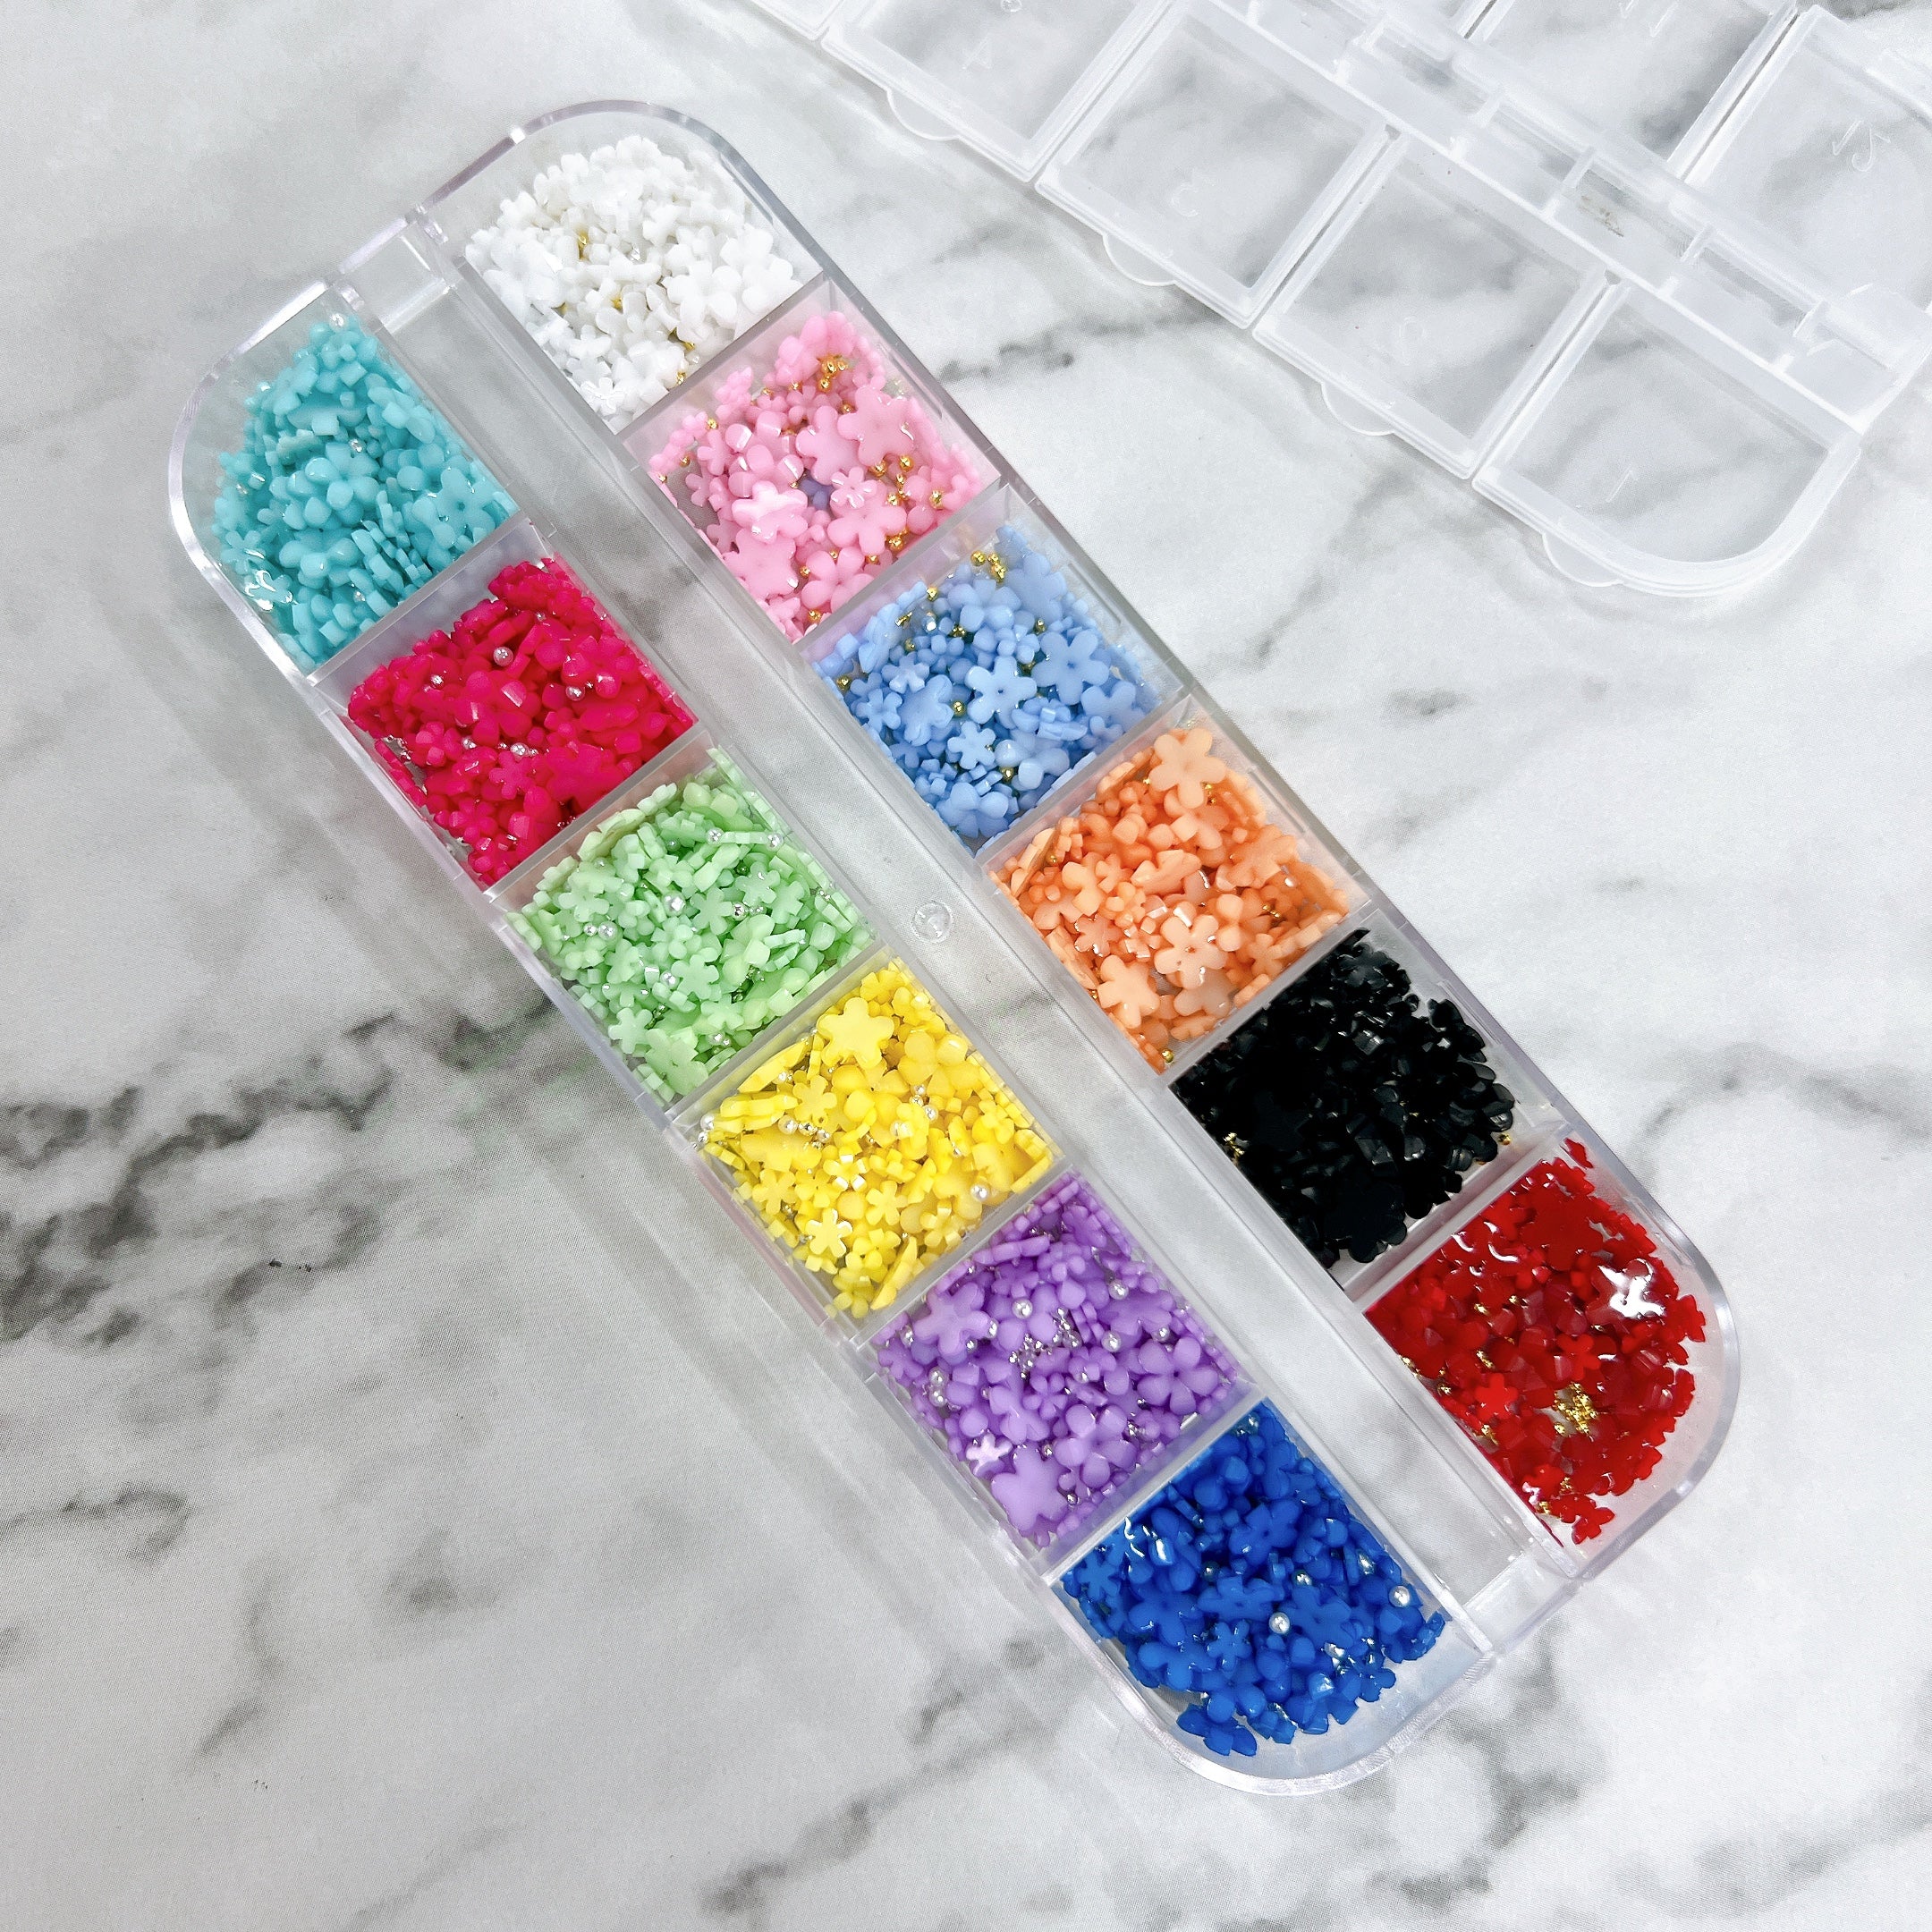 Mixed 12 colors of Mini Resin 3D Flower Nails